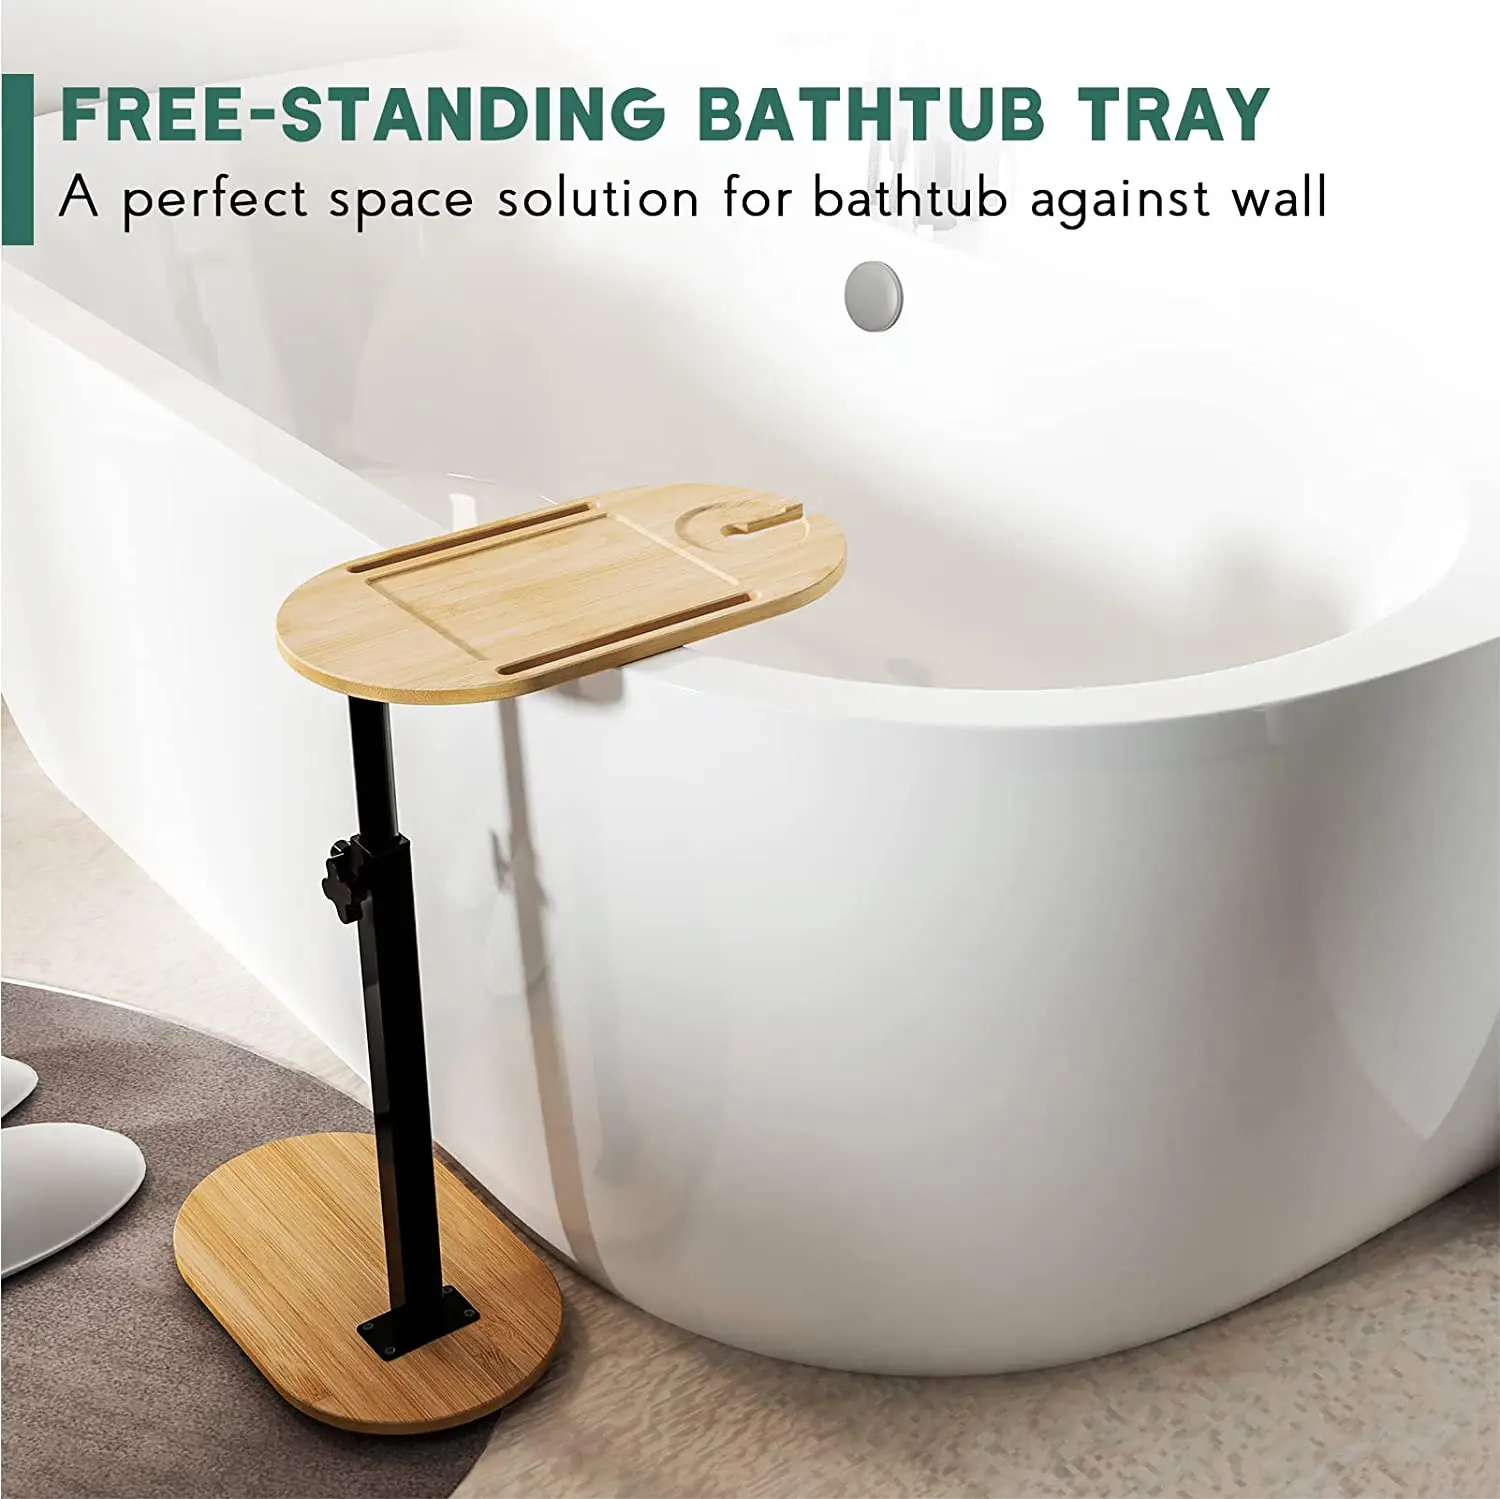 Bamboo Bathtub Tray Table with Adjustable Height Freestanding Bath Caddy Tray for Tub Against Wall